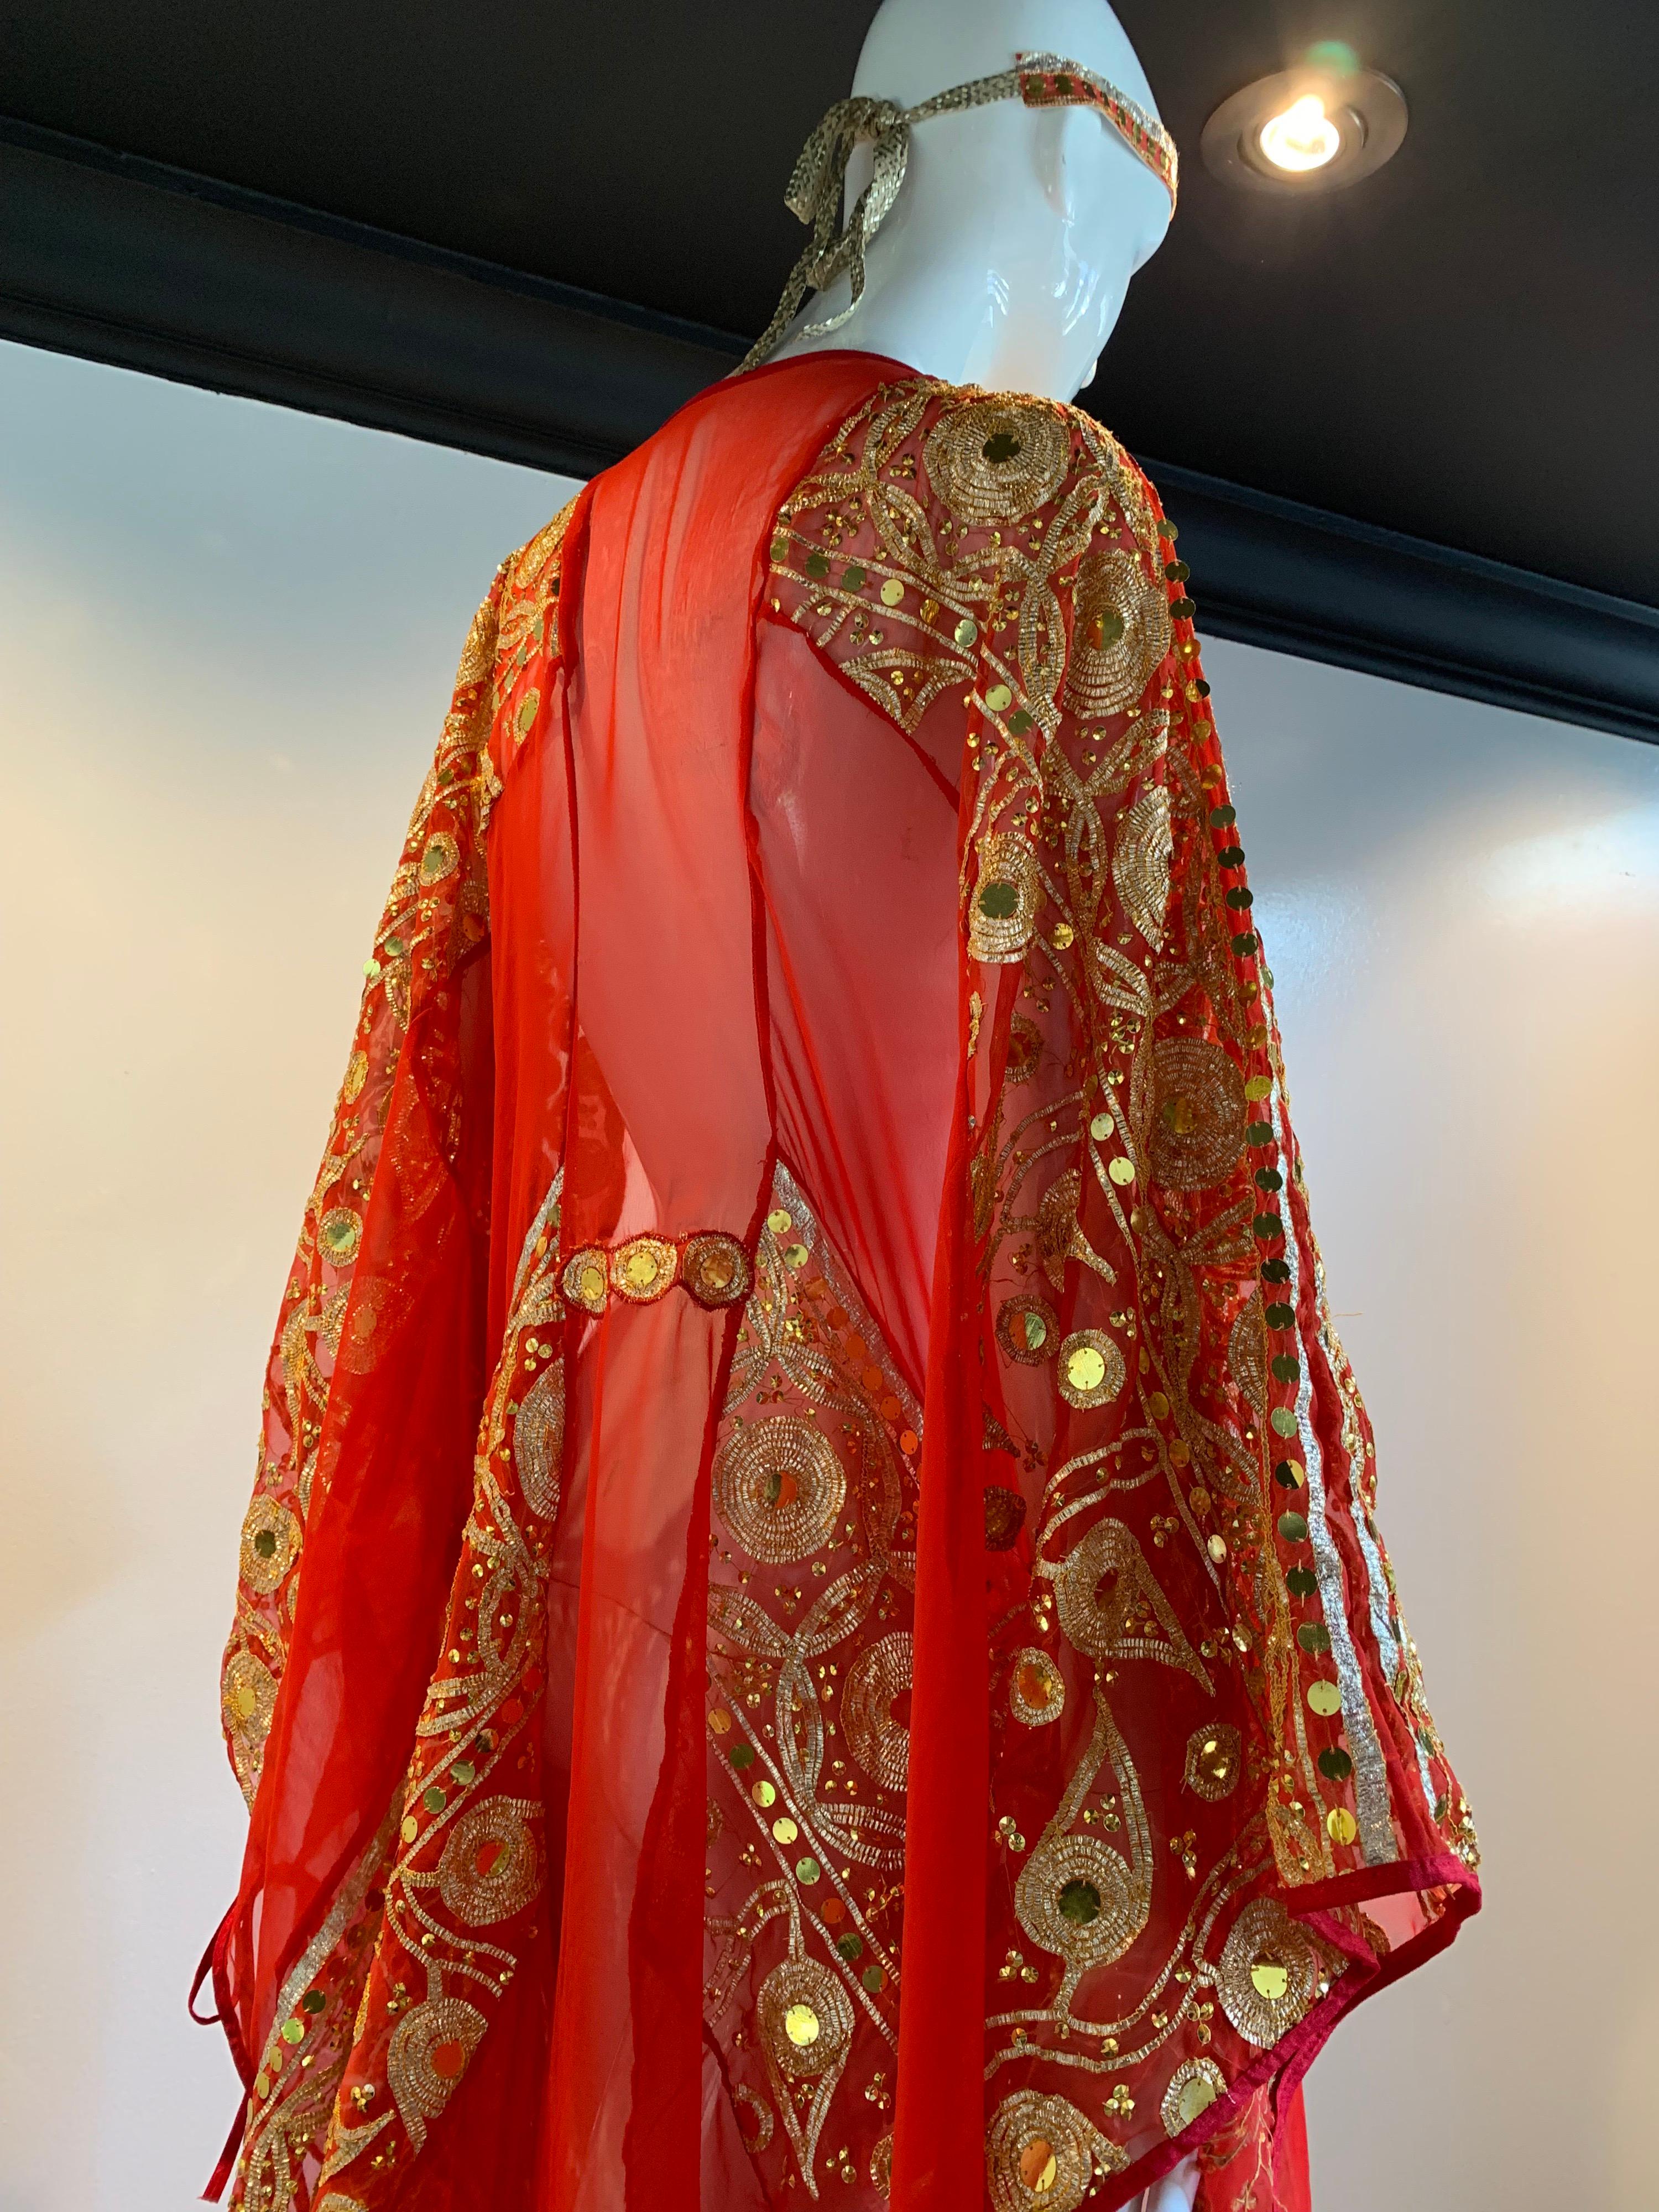 Torso Creations Red Silk Chiffon Caftan Heavily Embroidered W/ Gold & Sequins For Sale 7